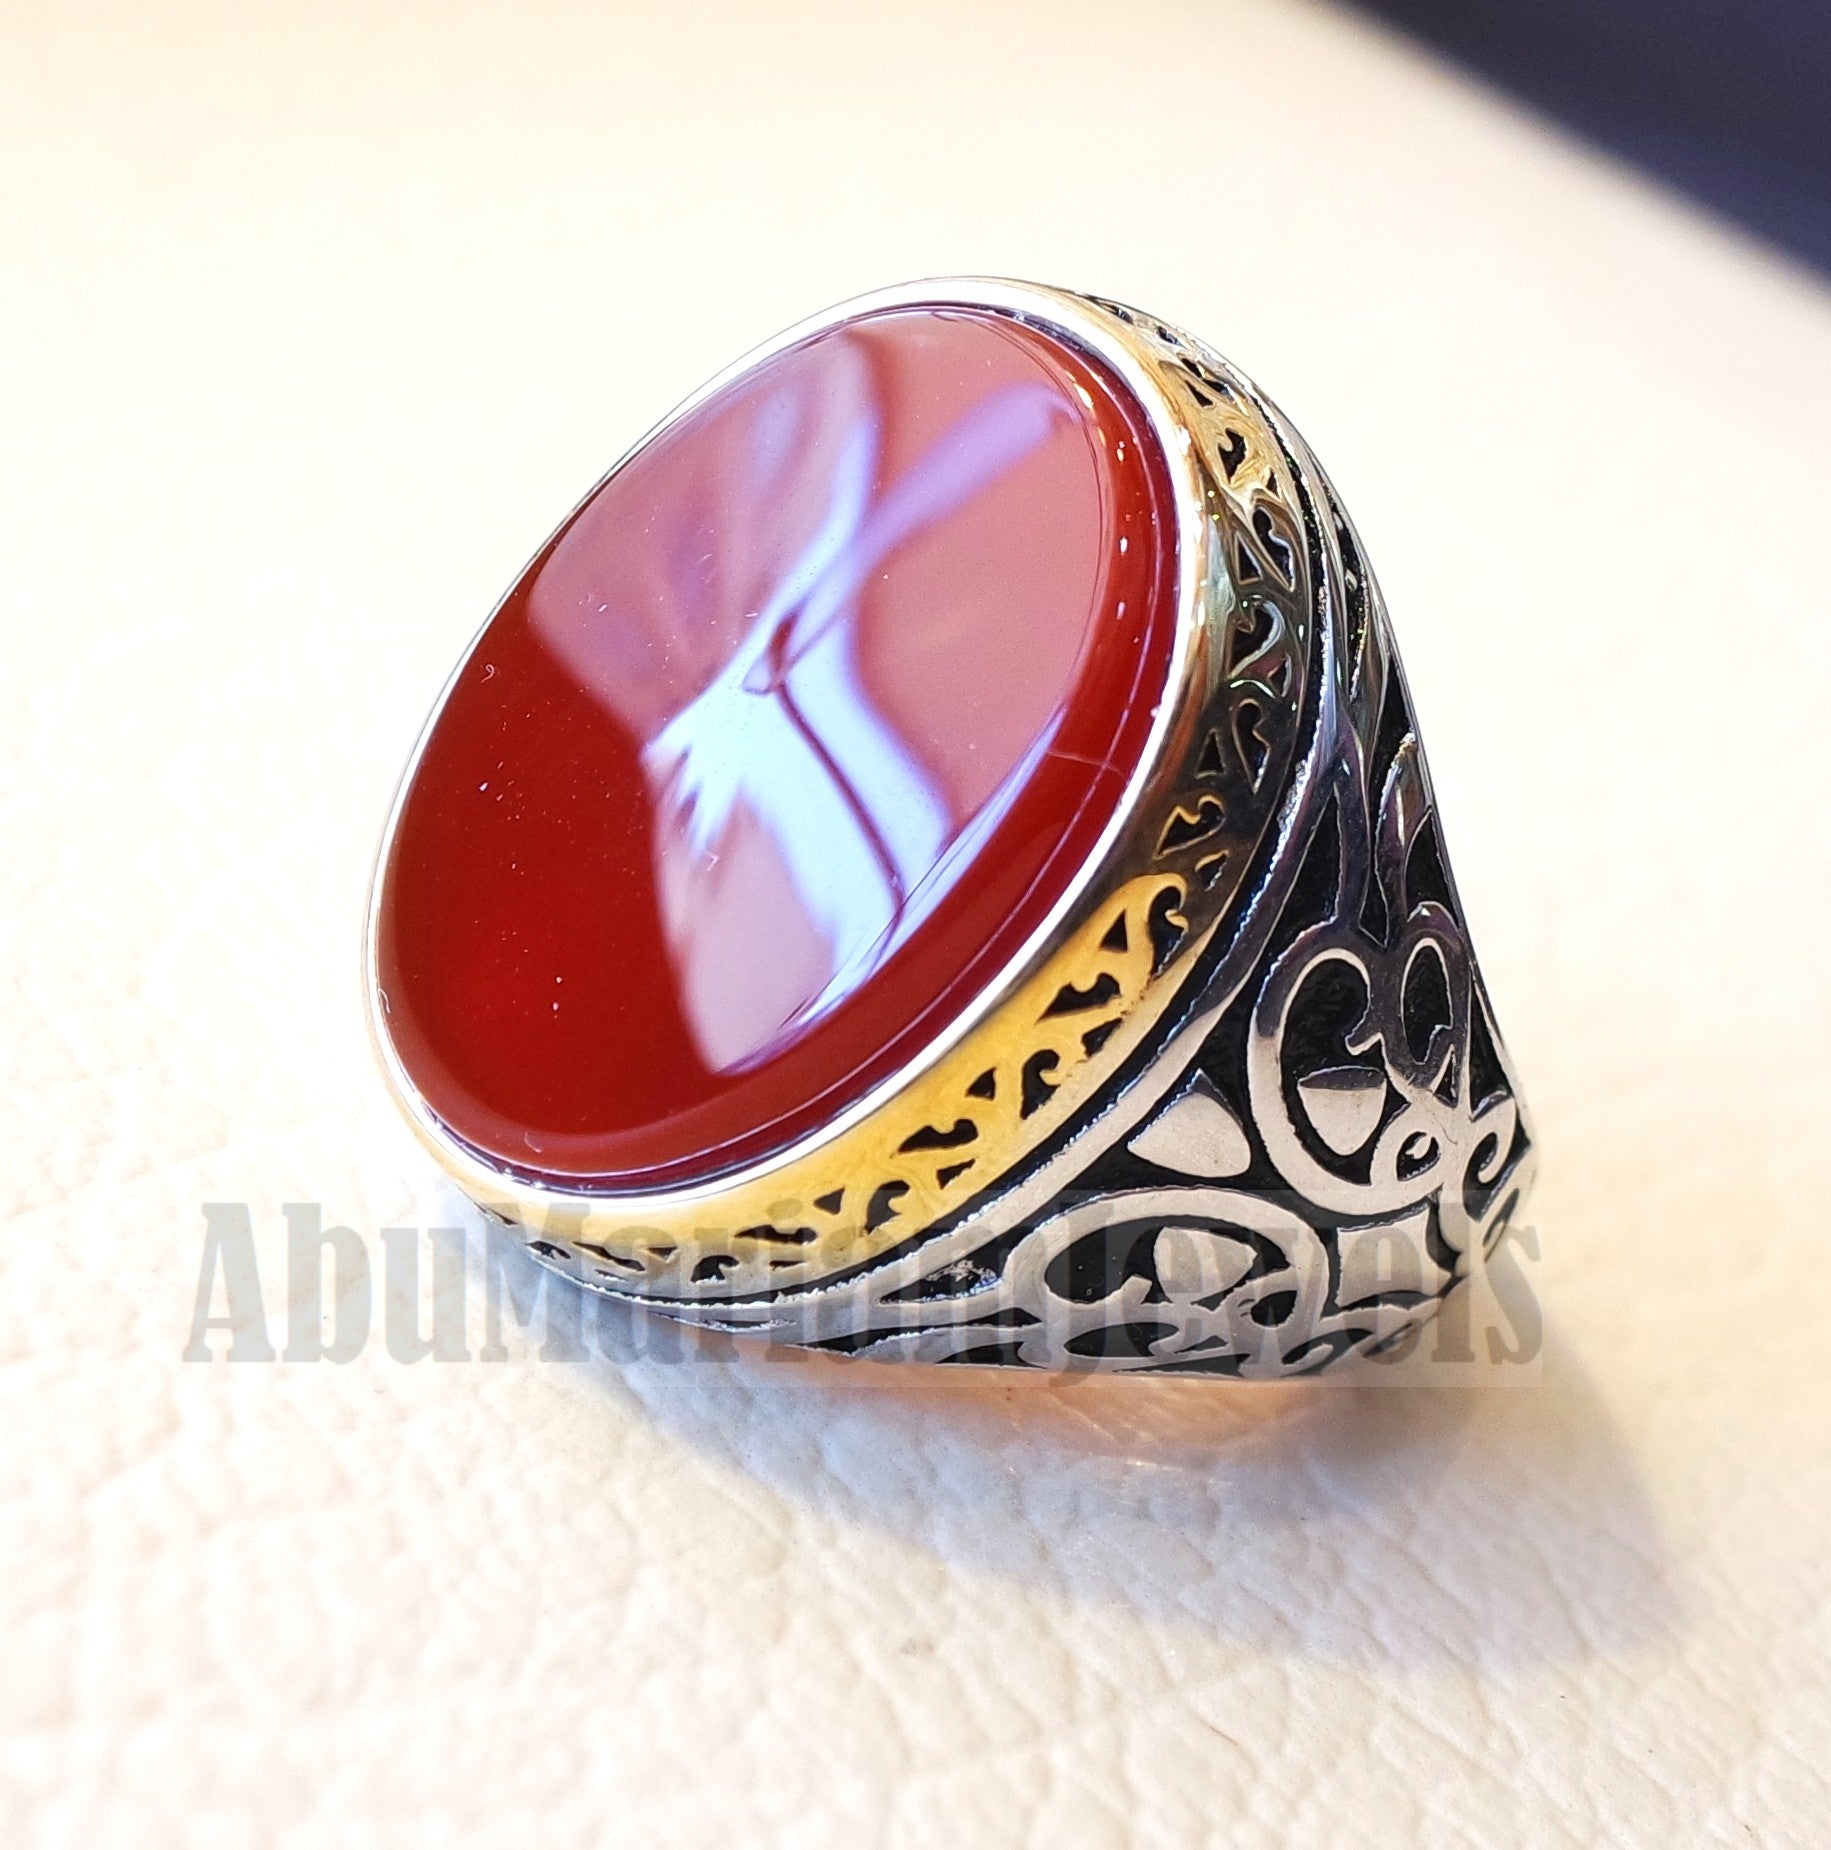 aqeeq natural flat agate carnelian stone oval red cabochon gem man ring sterling silver and yellow plating frame arabic turkey style